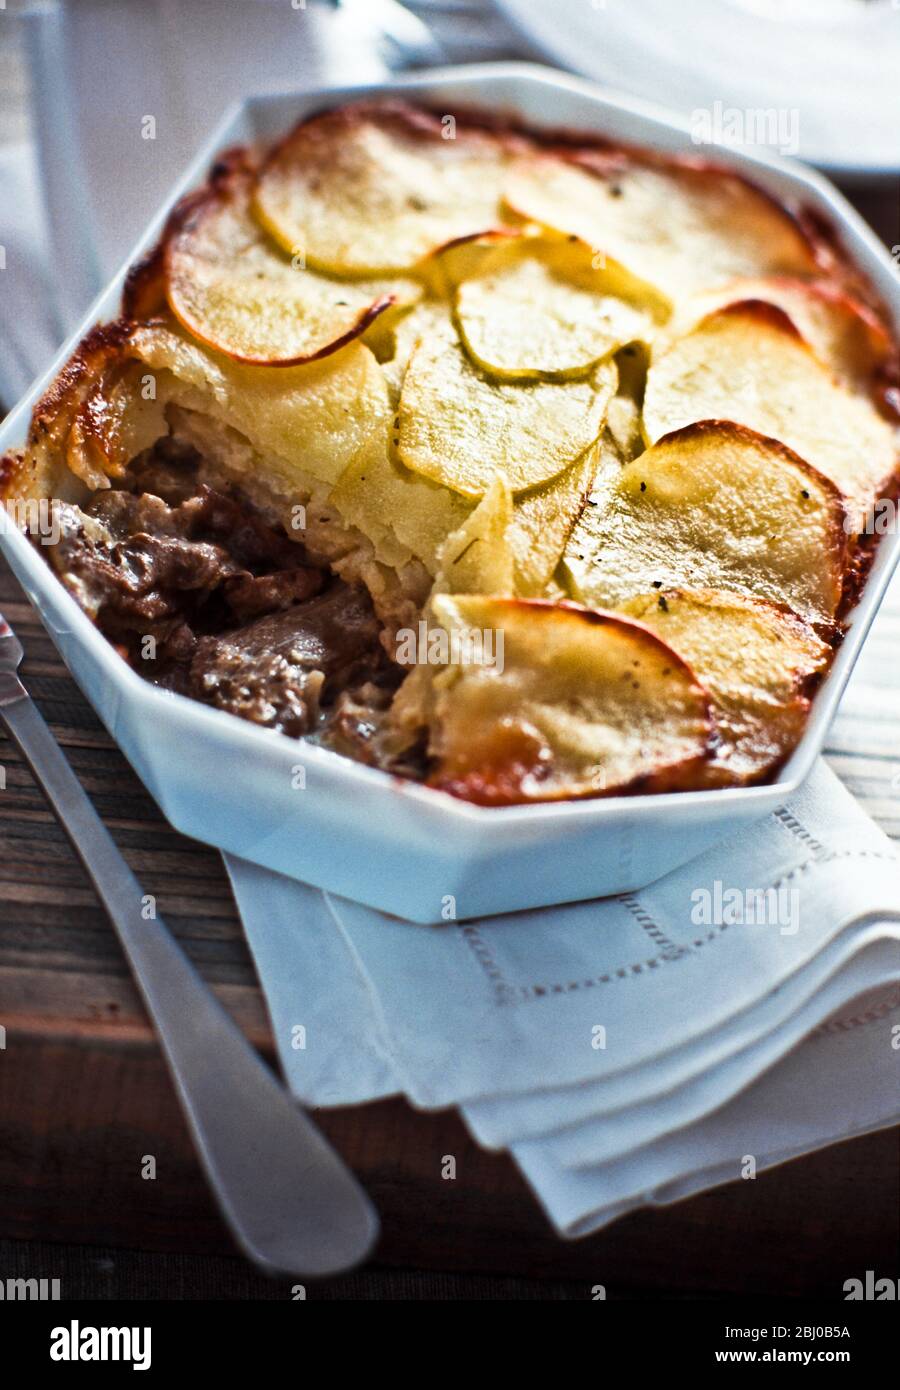 Lancashire hotpot: Classic English dish of beef and onions with layered potato slice topping - Stock Photo